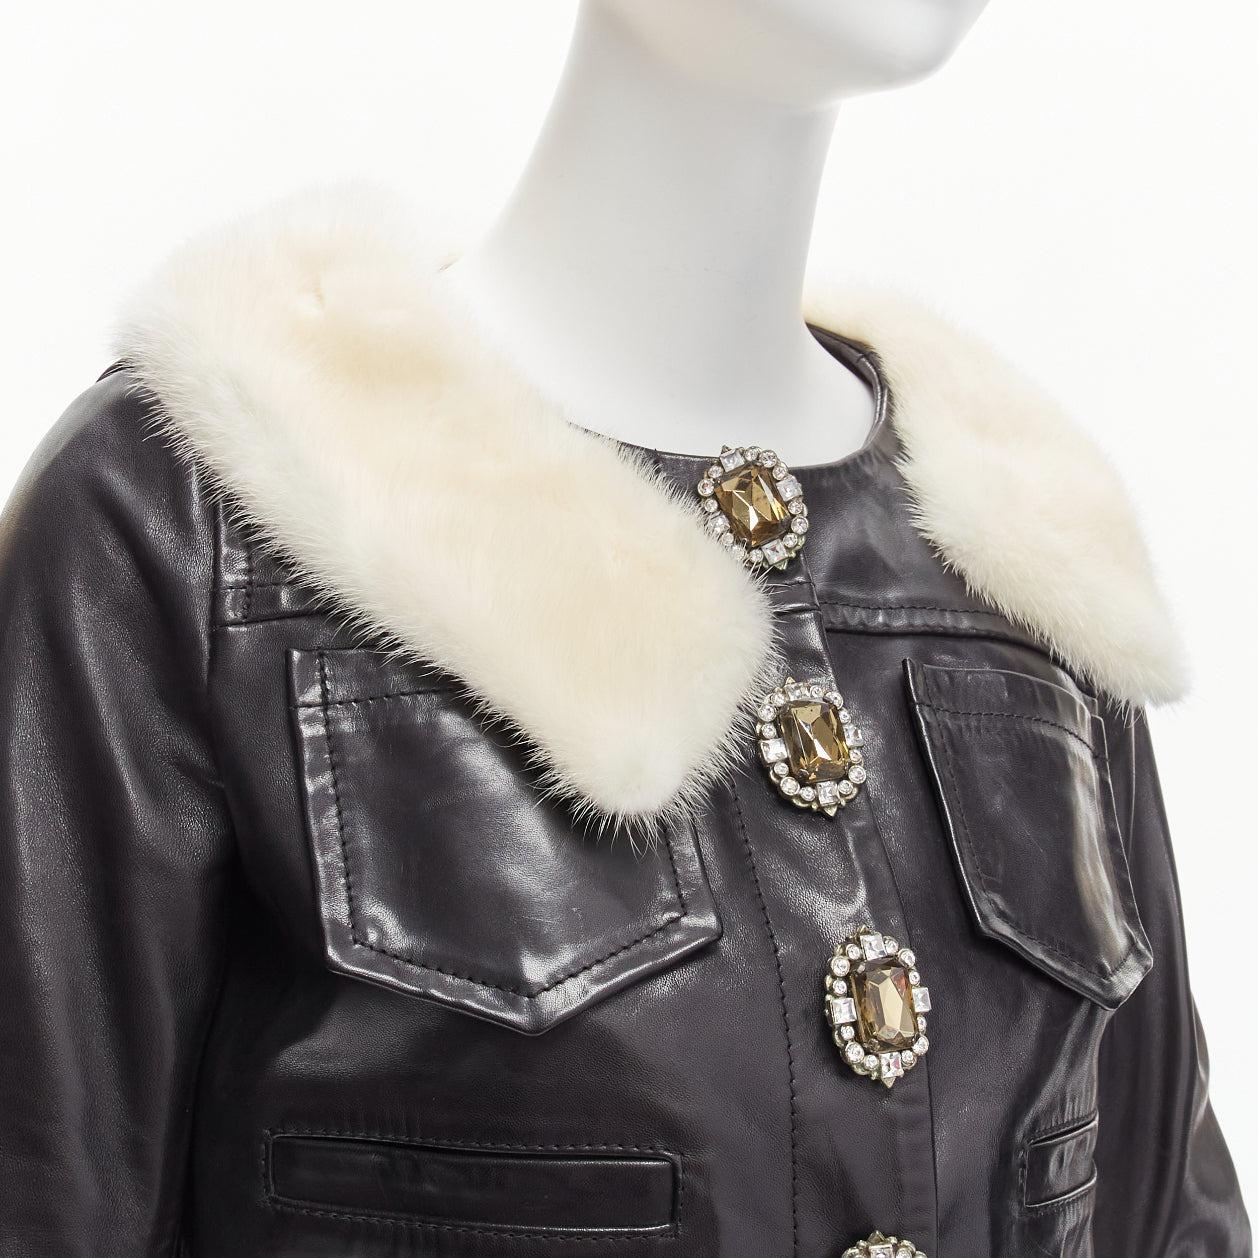 rare DSQUARED2 asymmetric fur collar jewel button cropped leather jacket IT40 S
Reference: NKLL/A00007
Brand: Dsquared2
Material: Leather
Color: Black, Multicolour
Pattern: Solid
Closure: Hook & Bar
Lining: Multicolour Cotton
Extra Details: Crystal